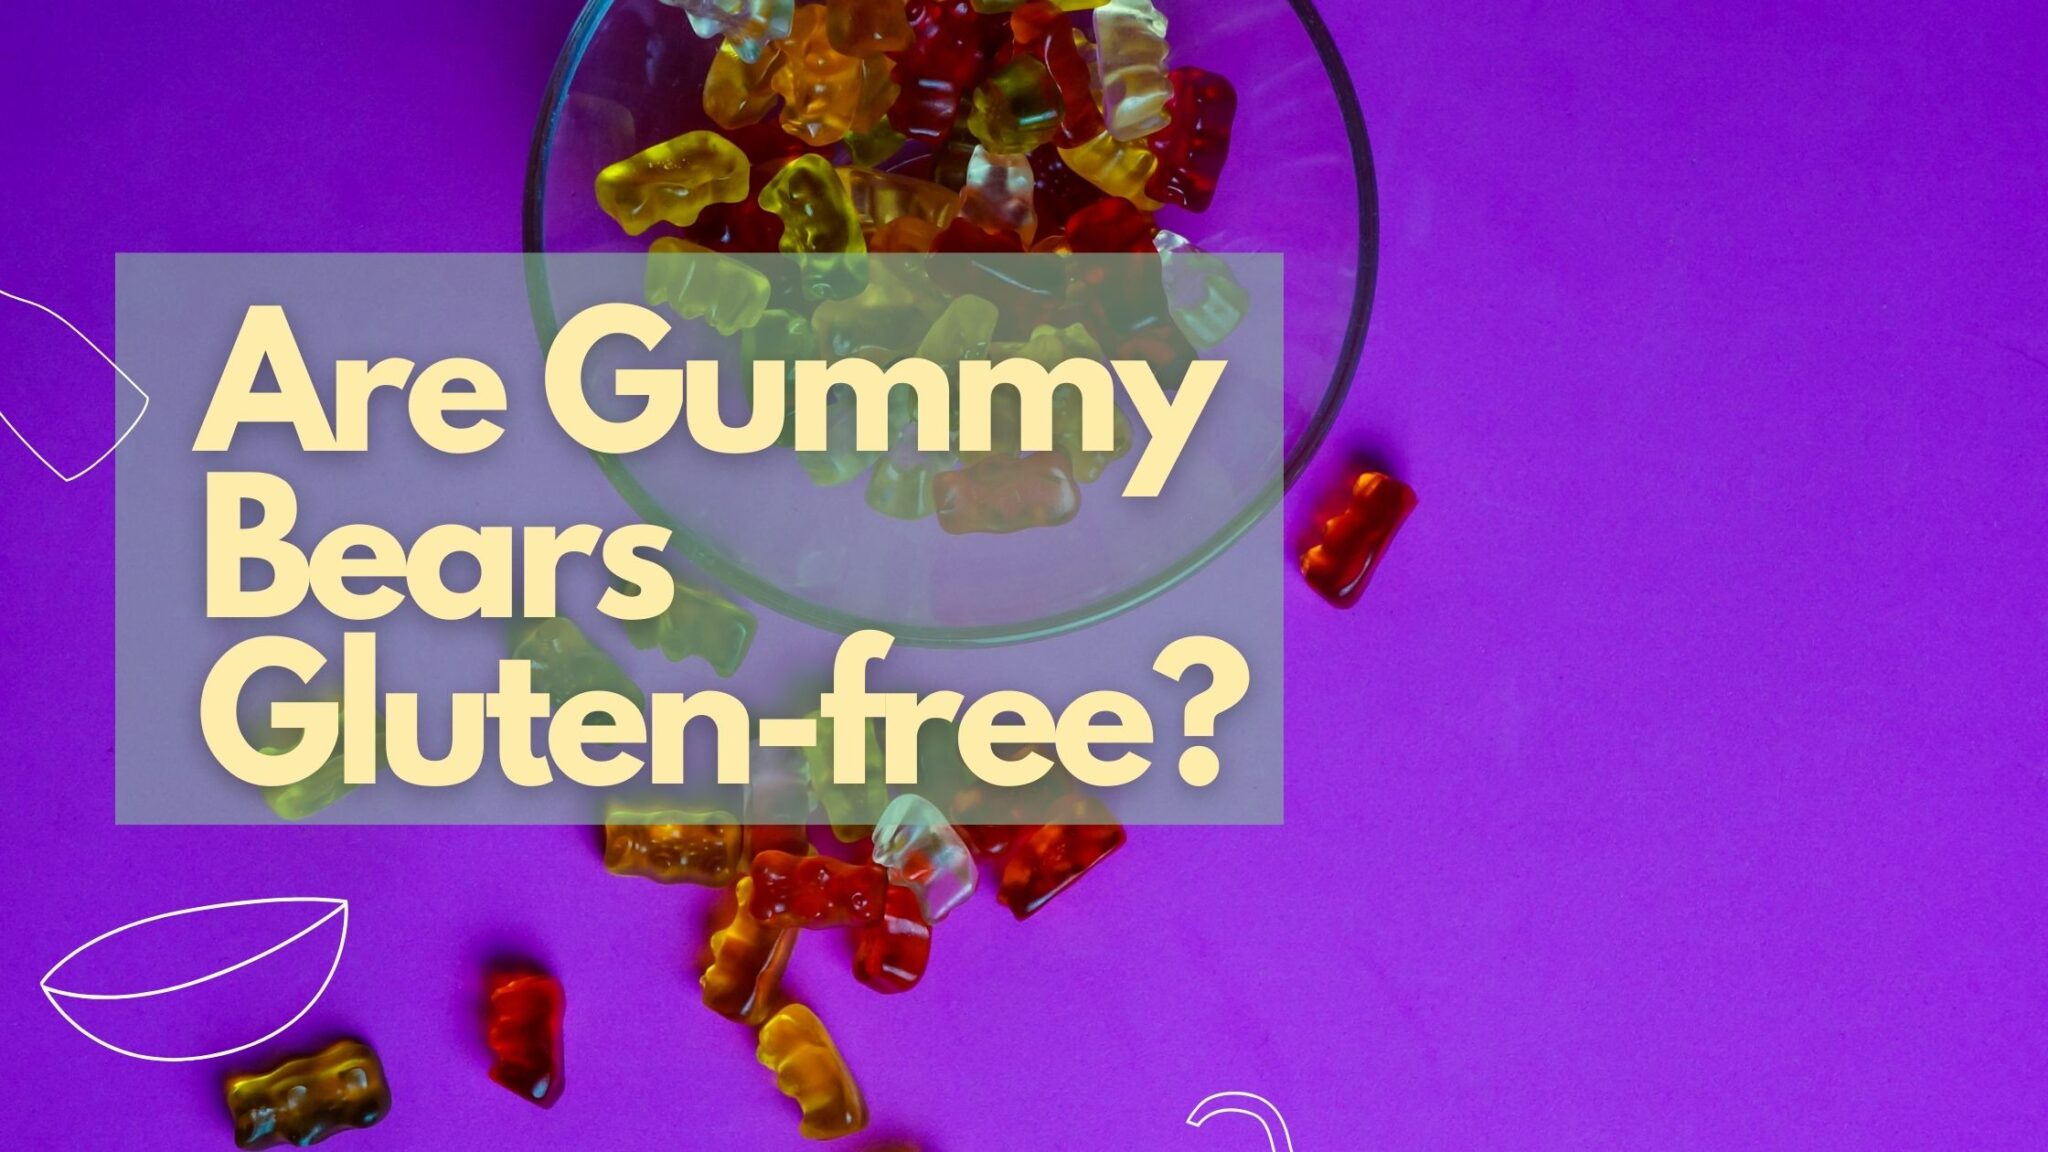  Are Gummy Bears Gluten-Free? Let’s find out.